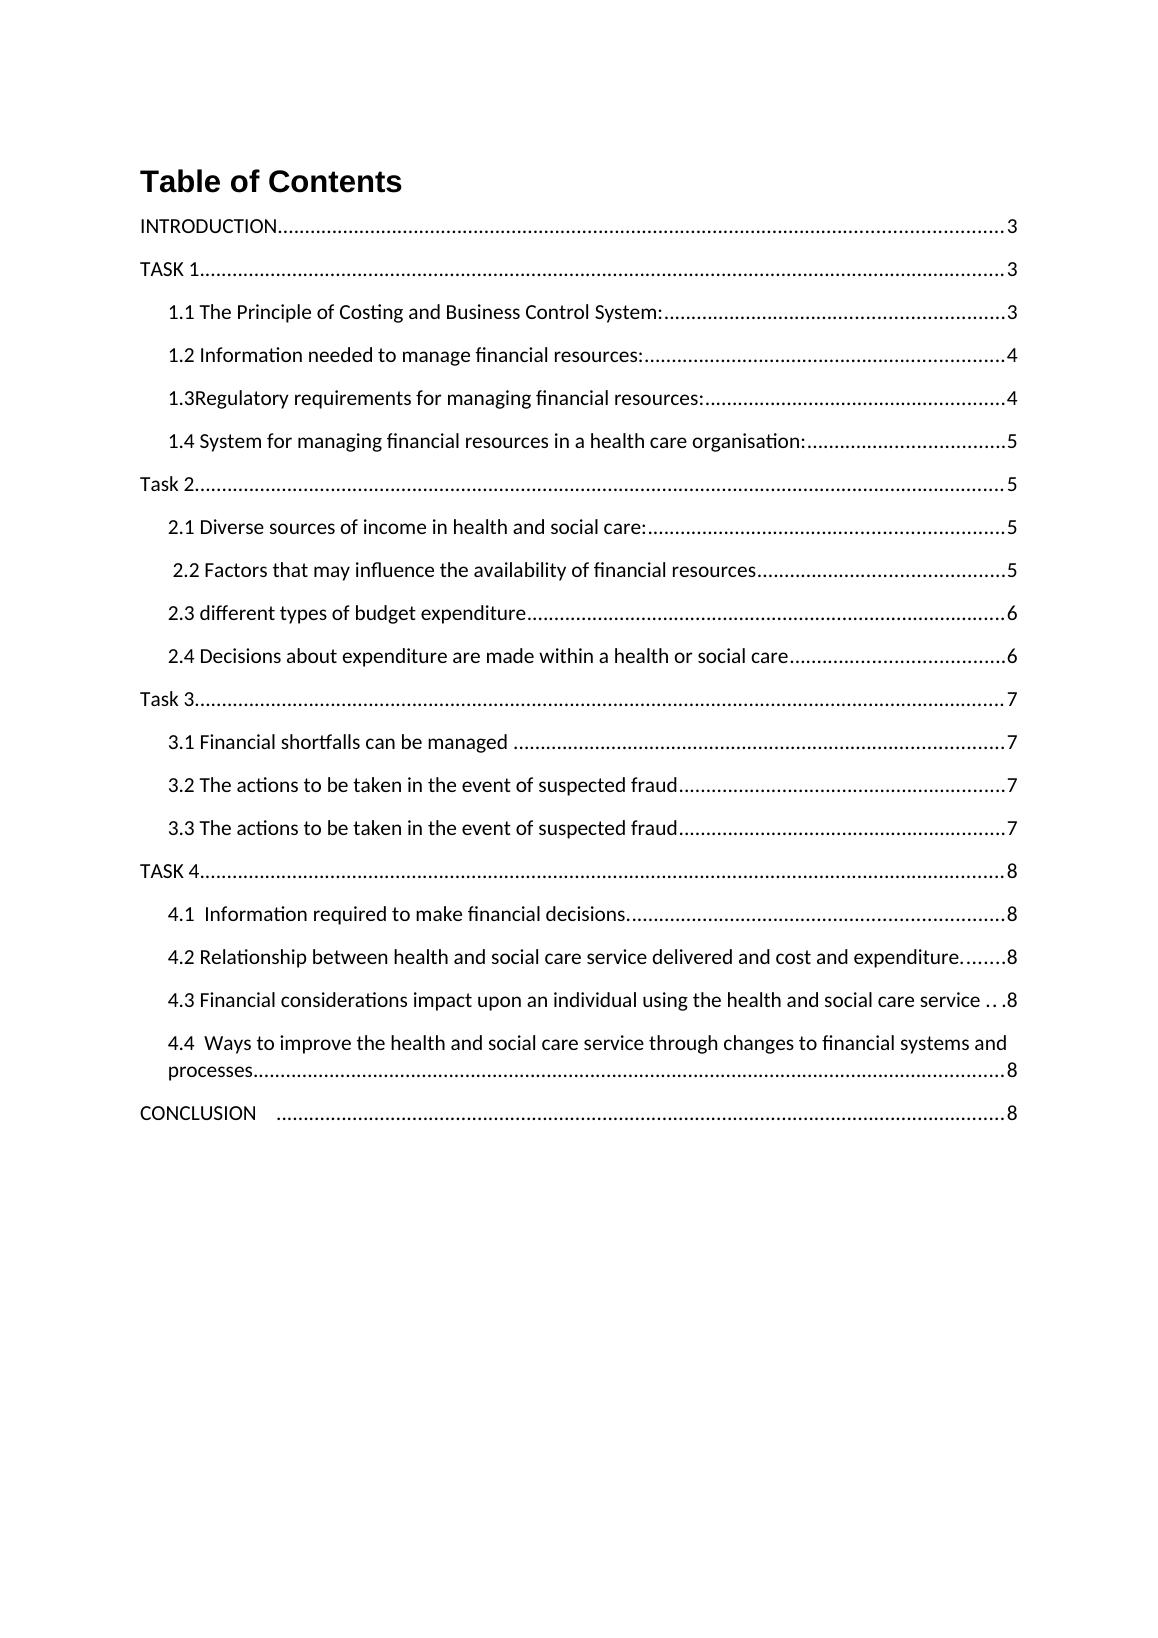 Managing Financial Resources in Health and Social Care (HSC) - Assignment_2